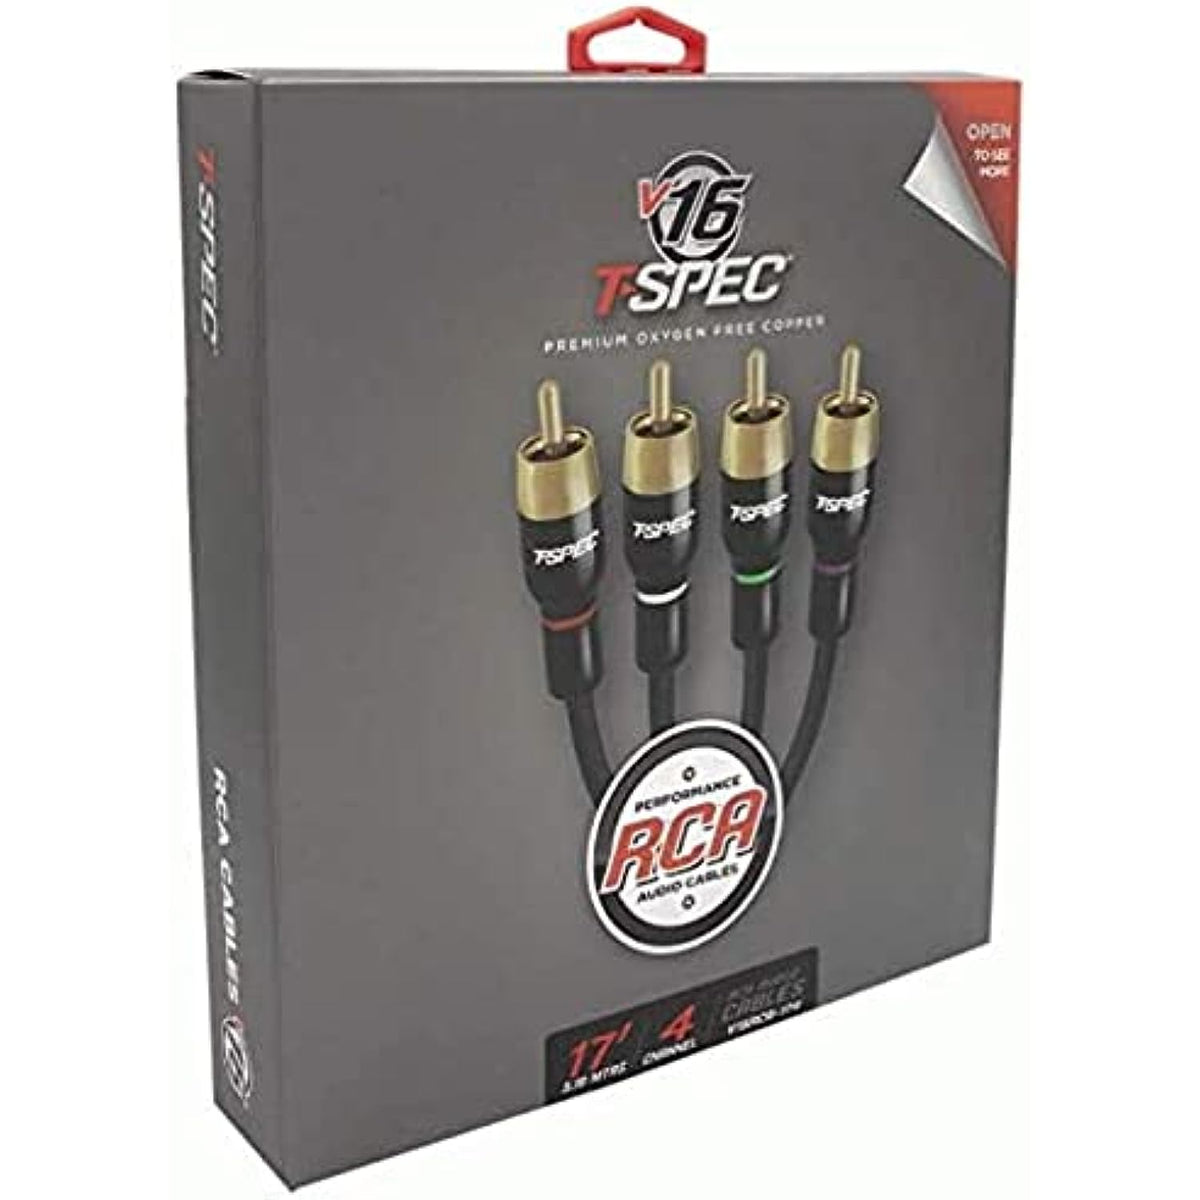 T-SPEC - V16 Series 4 Channel Rca Audio Cables - 17 Feet,V16 Series Audio Cables (V16RCA-174)